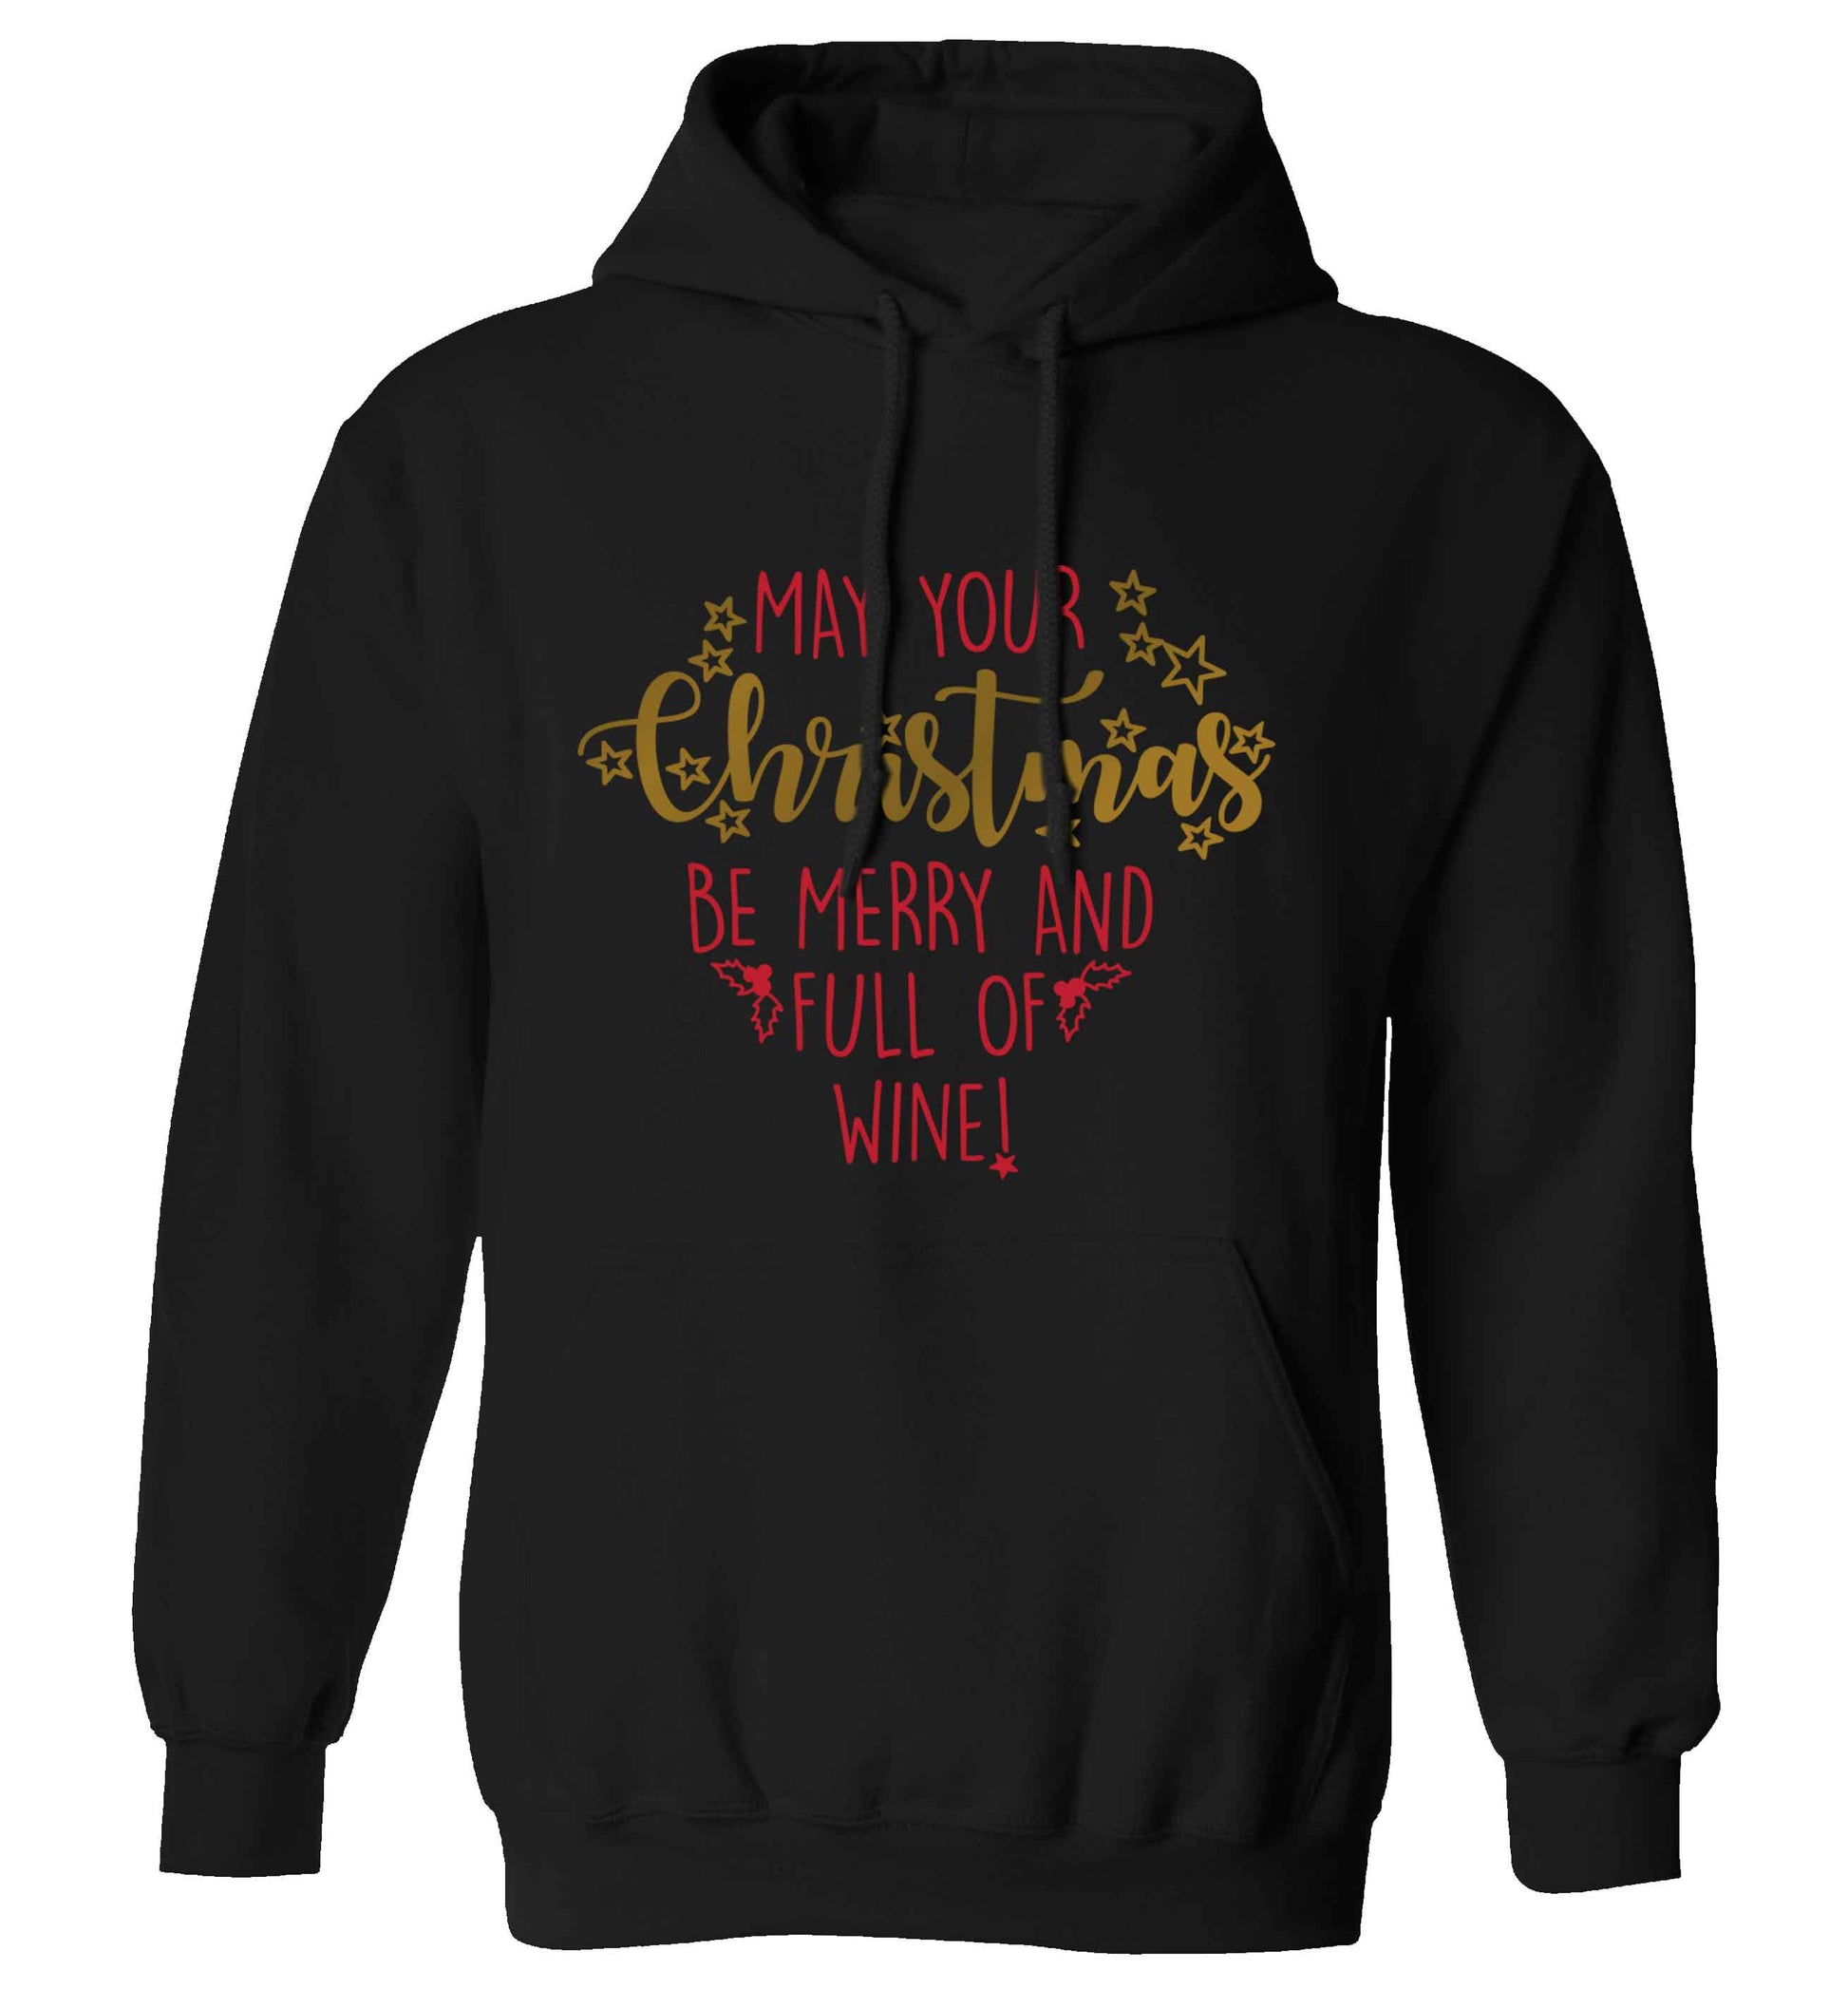 May your Christmas be merry and full of wine adults unisex black hoodie 2XL